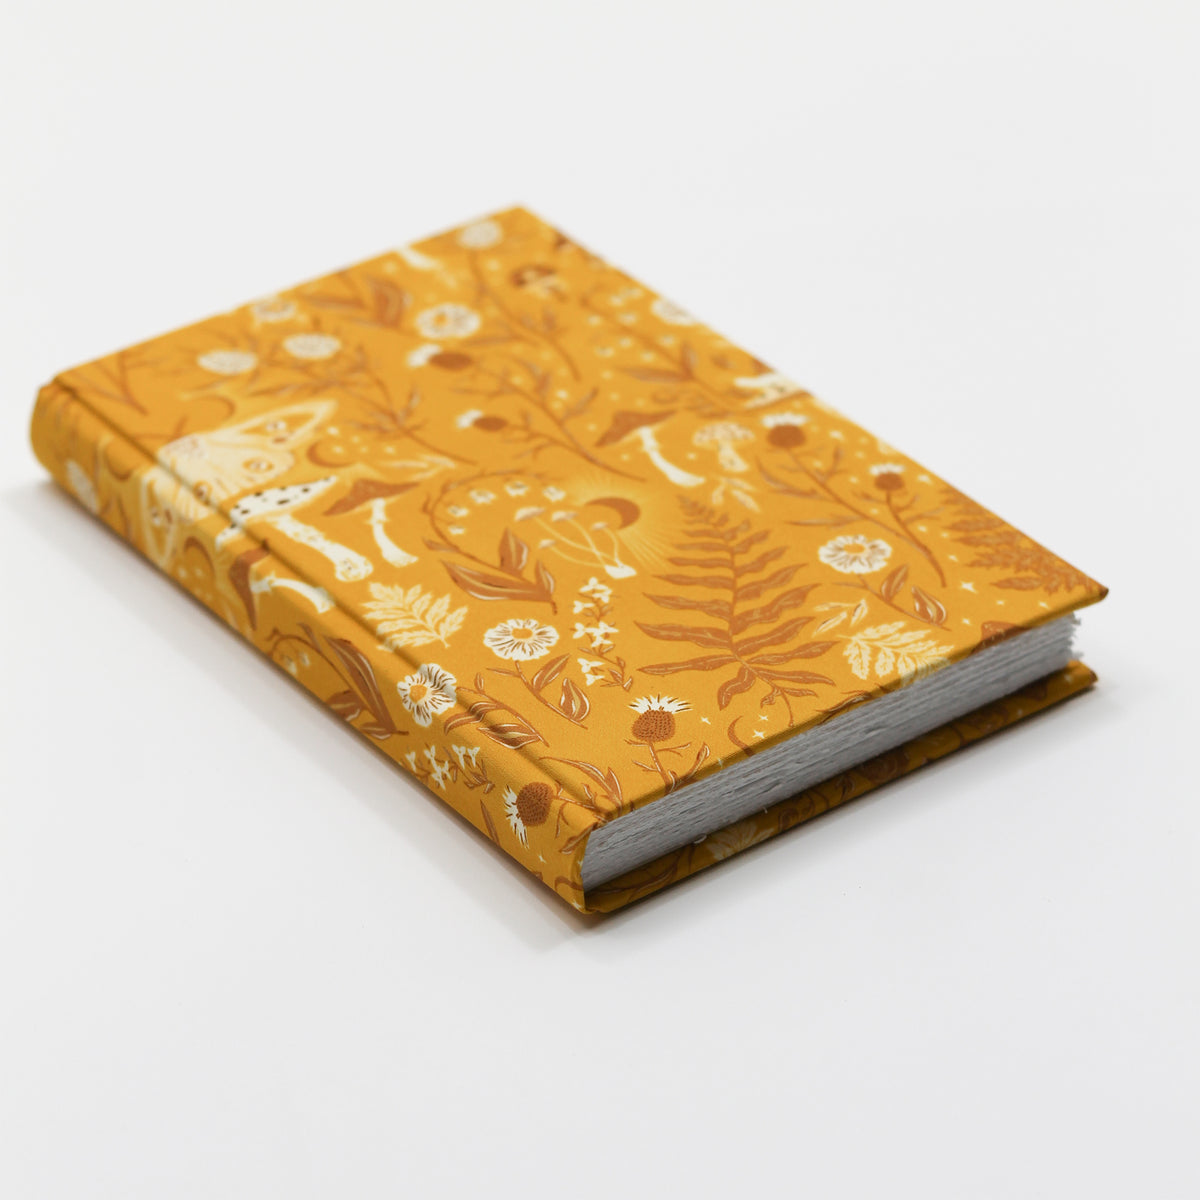 Medium Blank Page Journal with Golden Thistle Cover